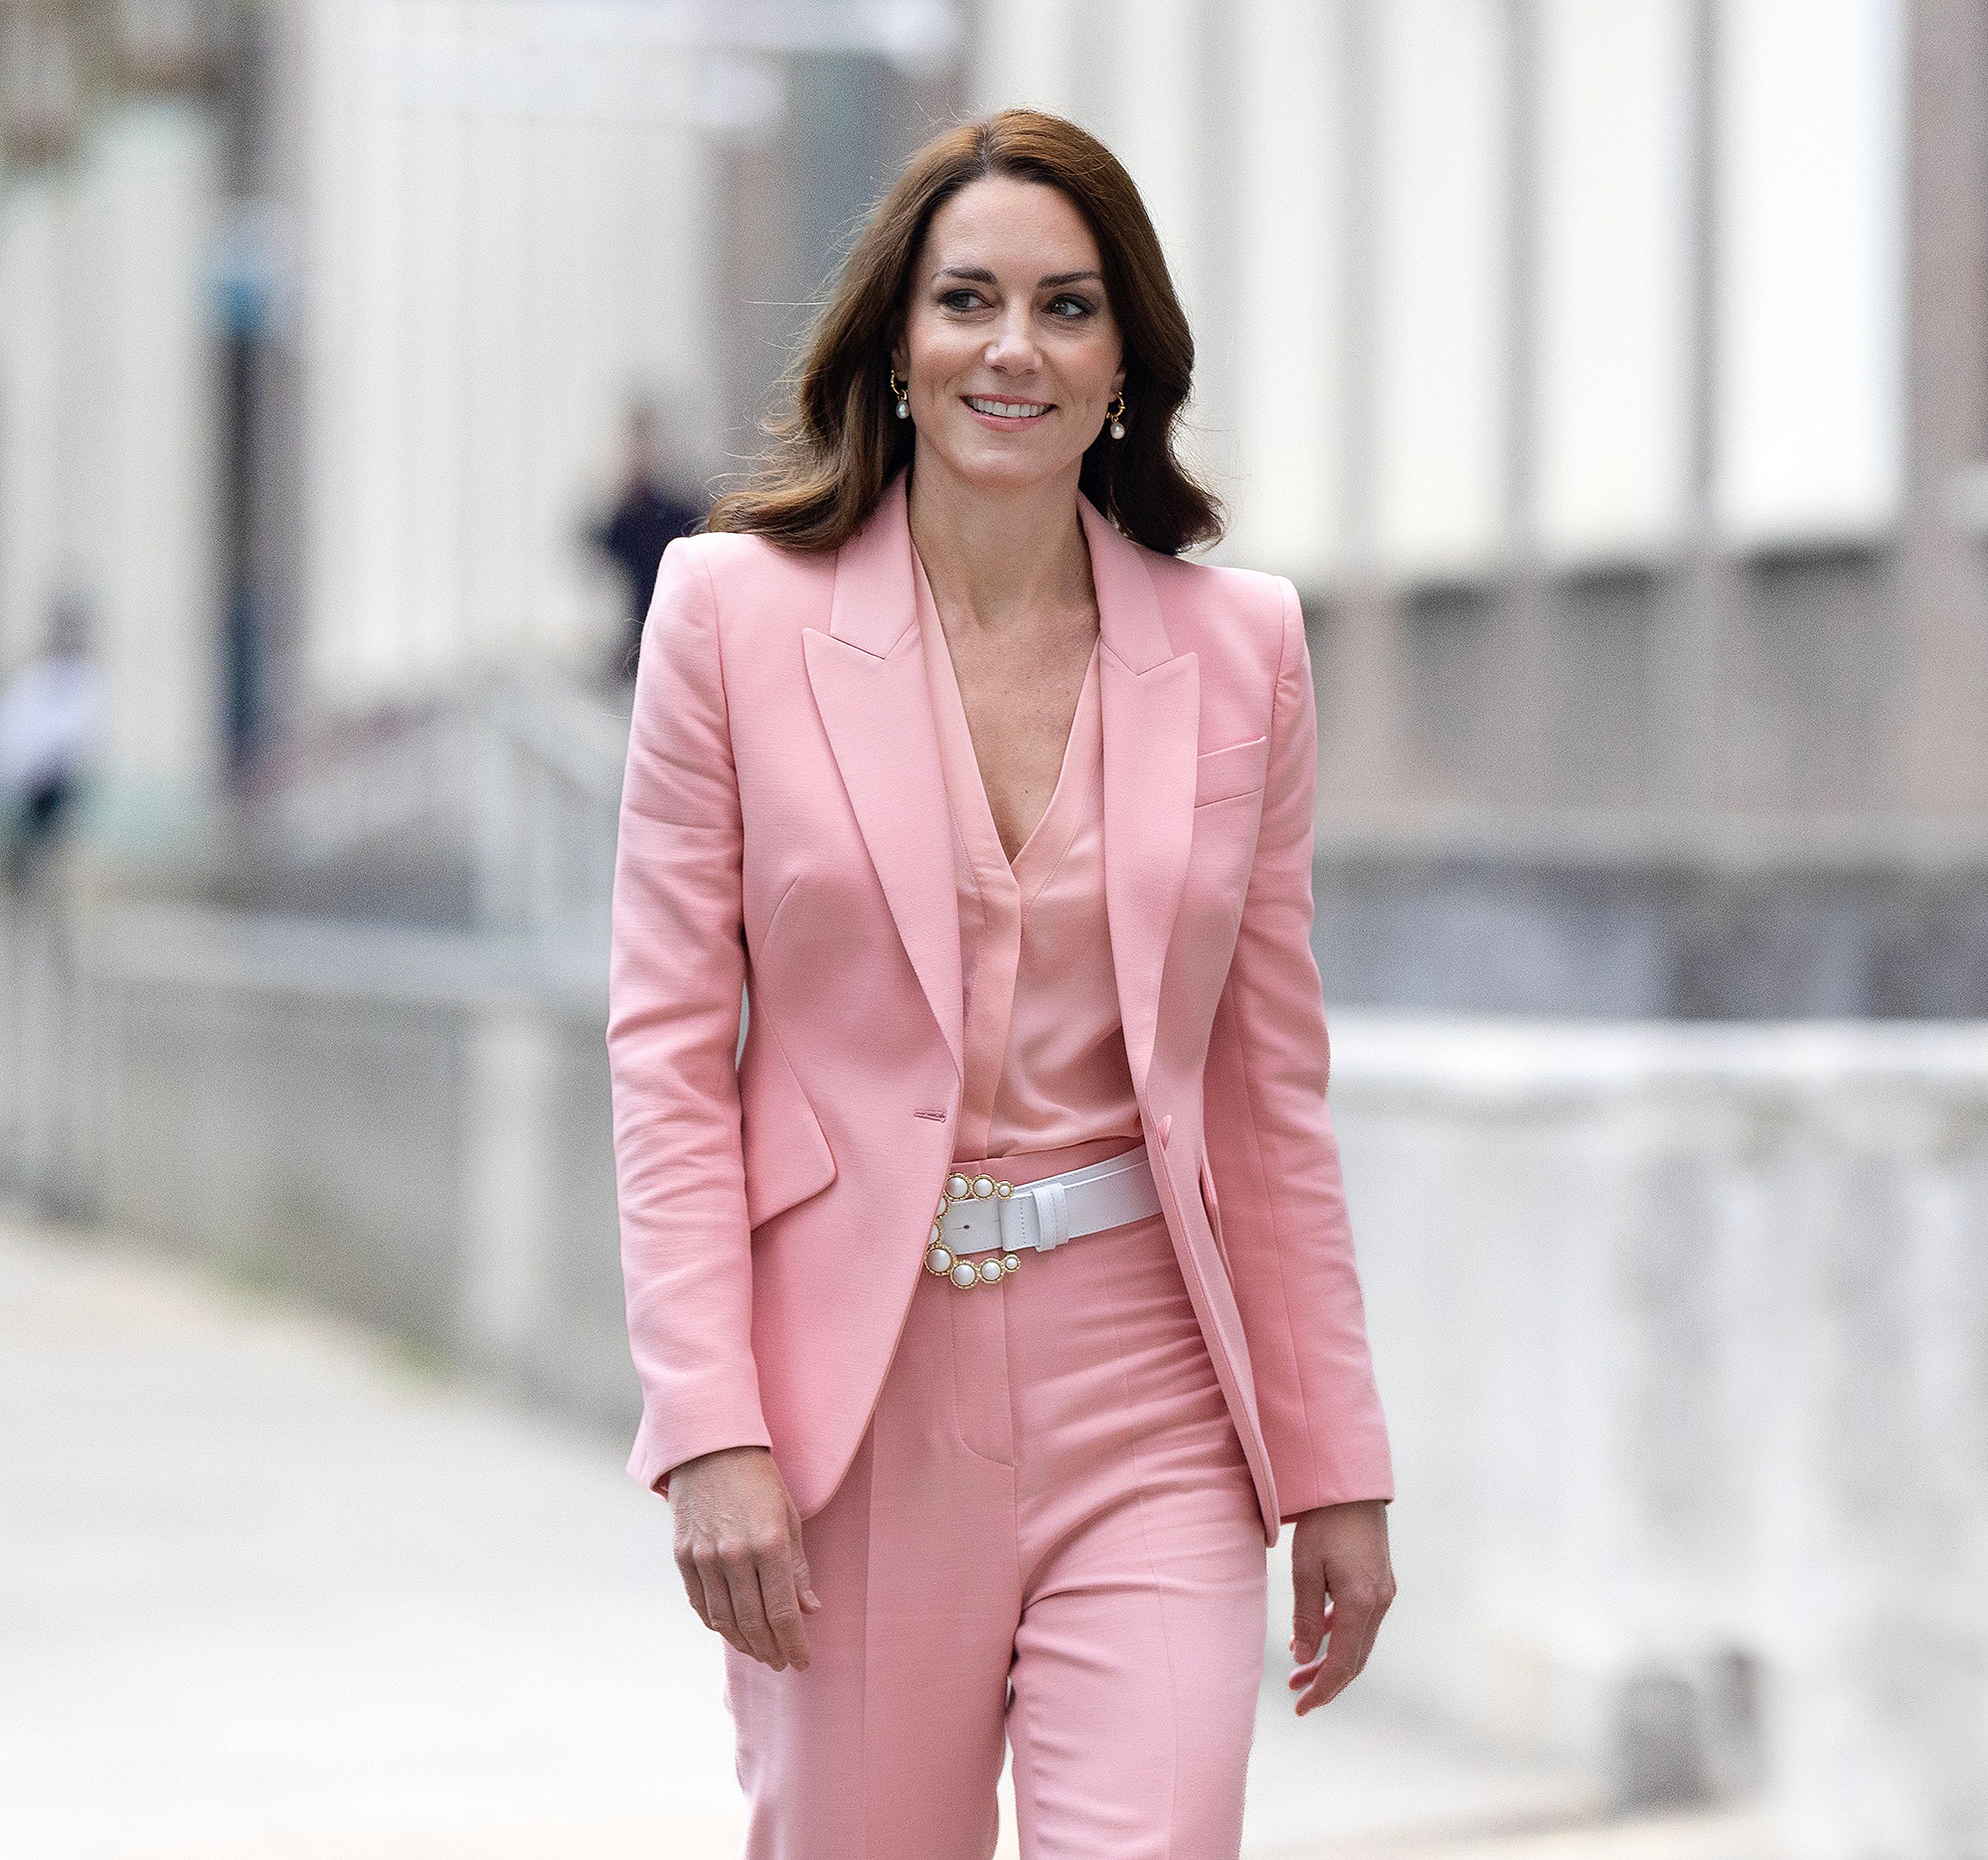 Kate Middleton $120 Pearl Belt — Get the Look for $12